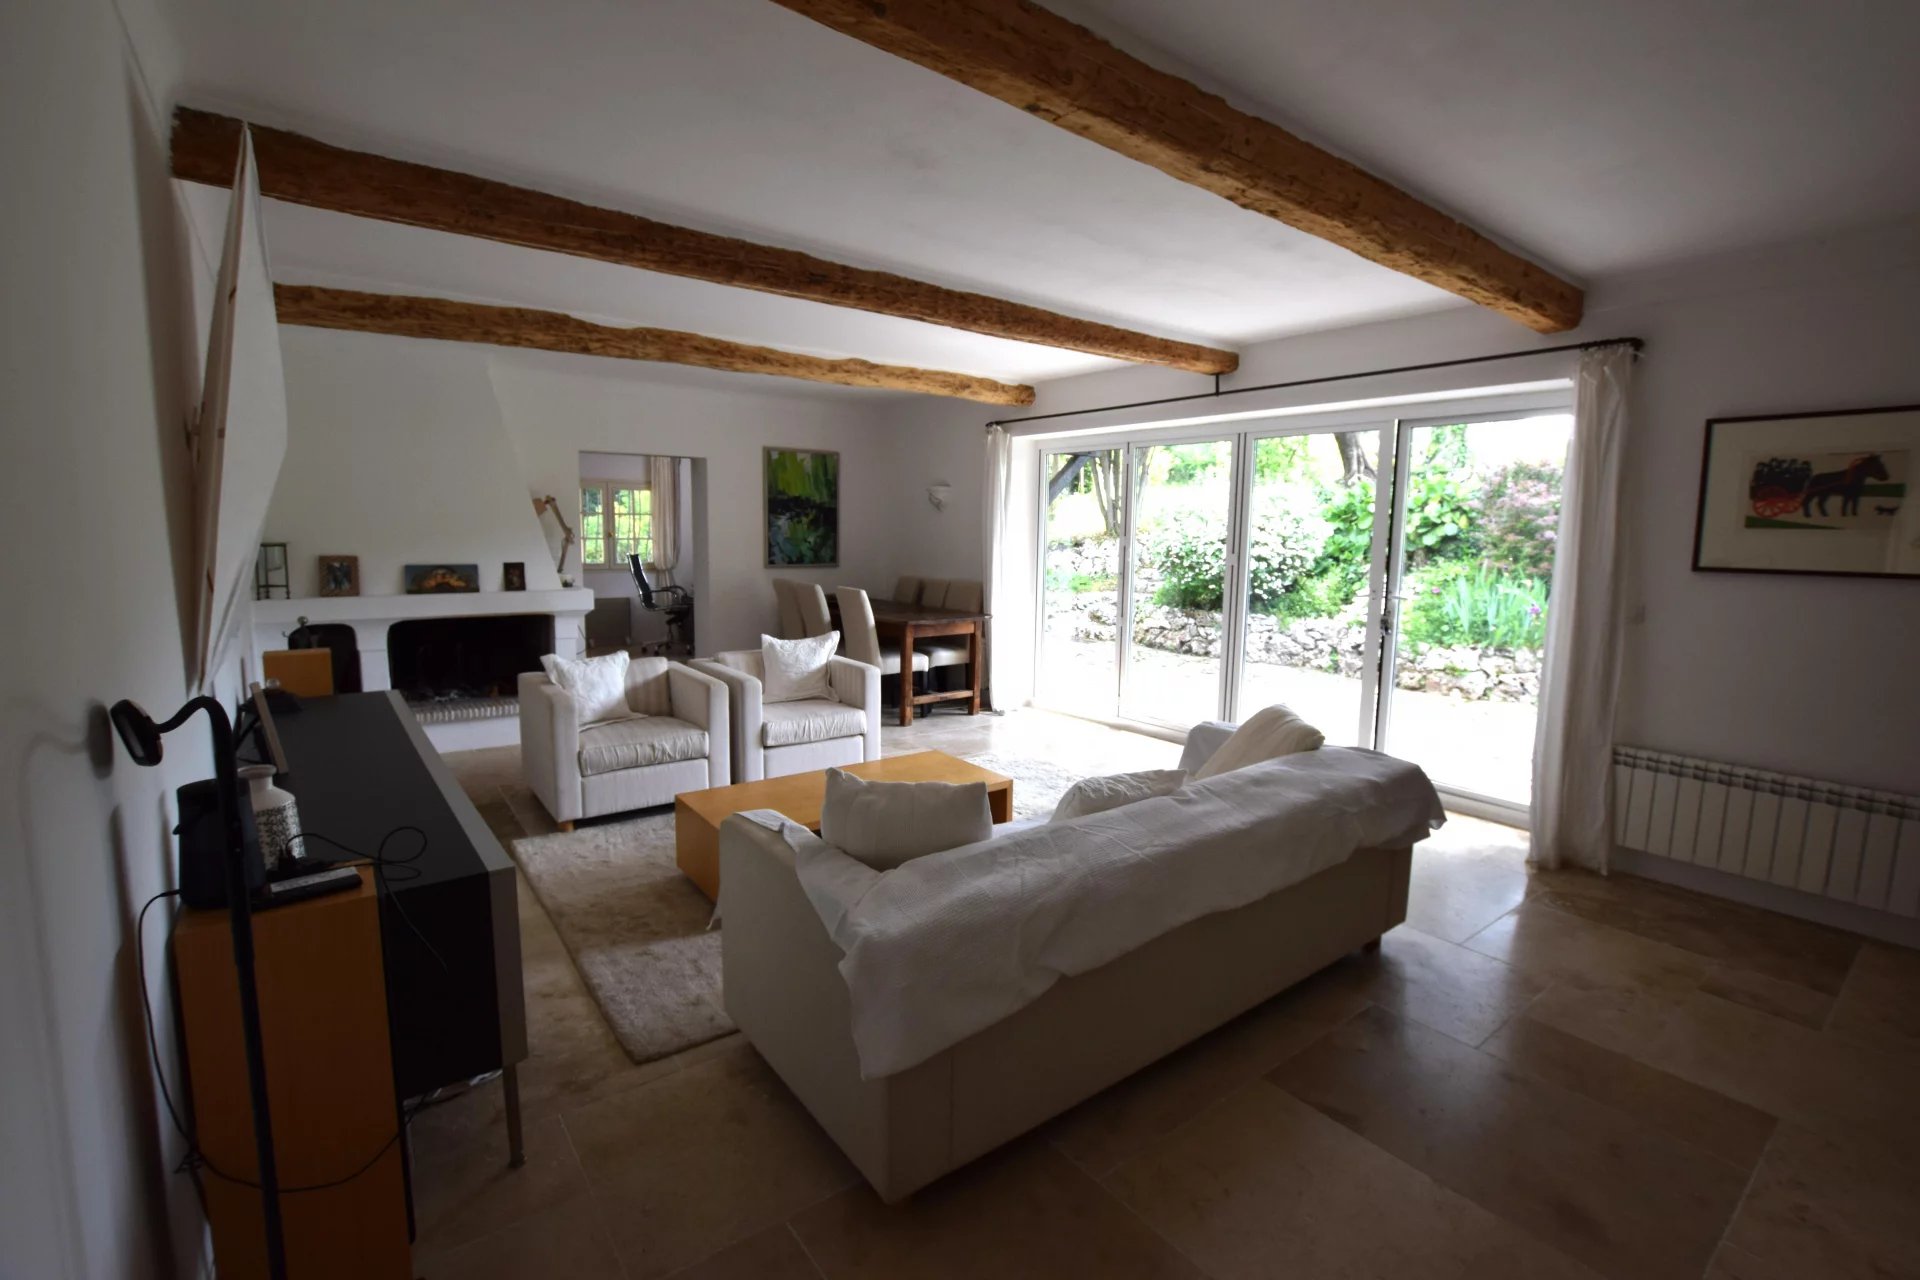 Beautiful Property For Sale in Vence France